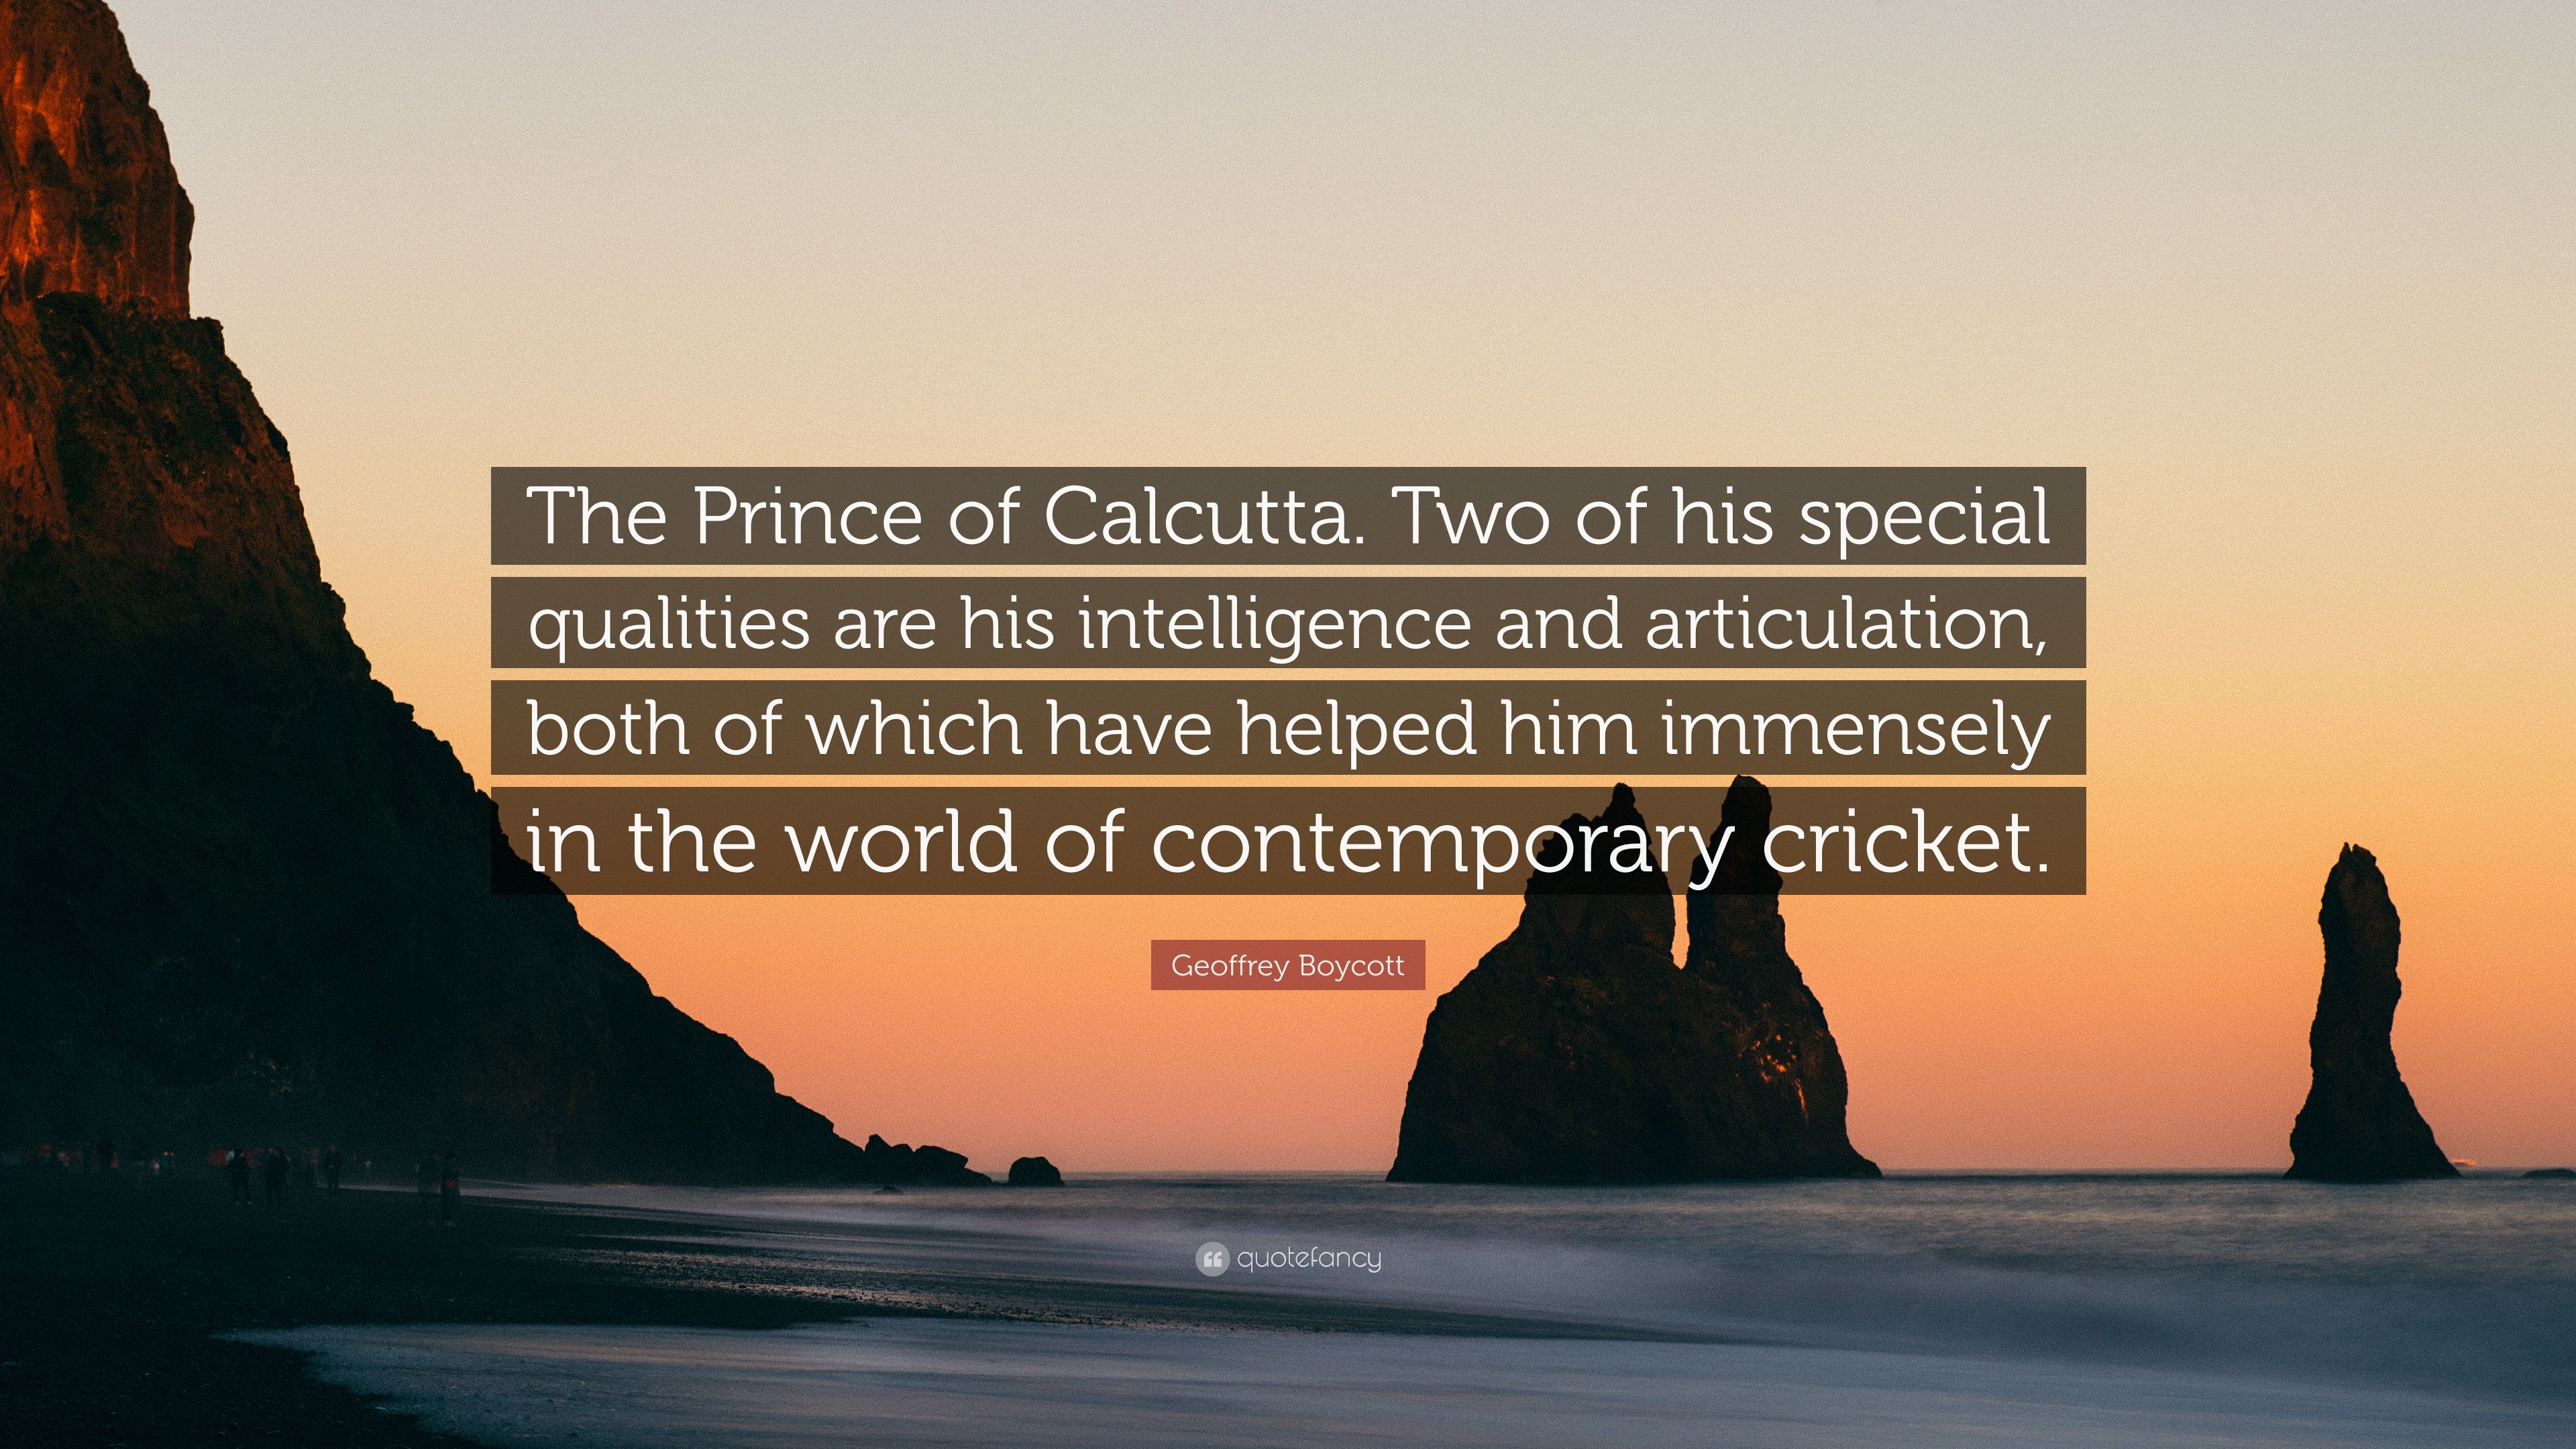 Geoffrey Boycott Quote: “The Prince of Calcutta. Two of his special